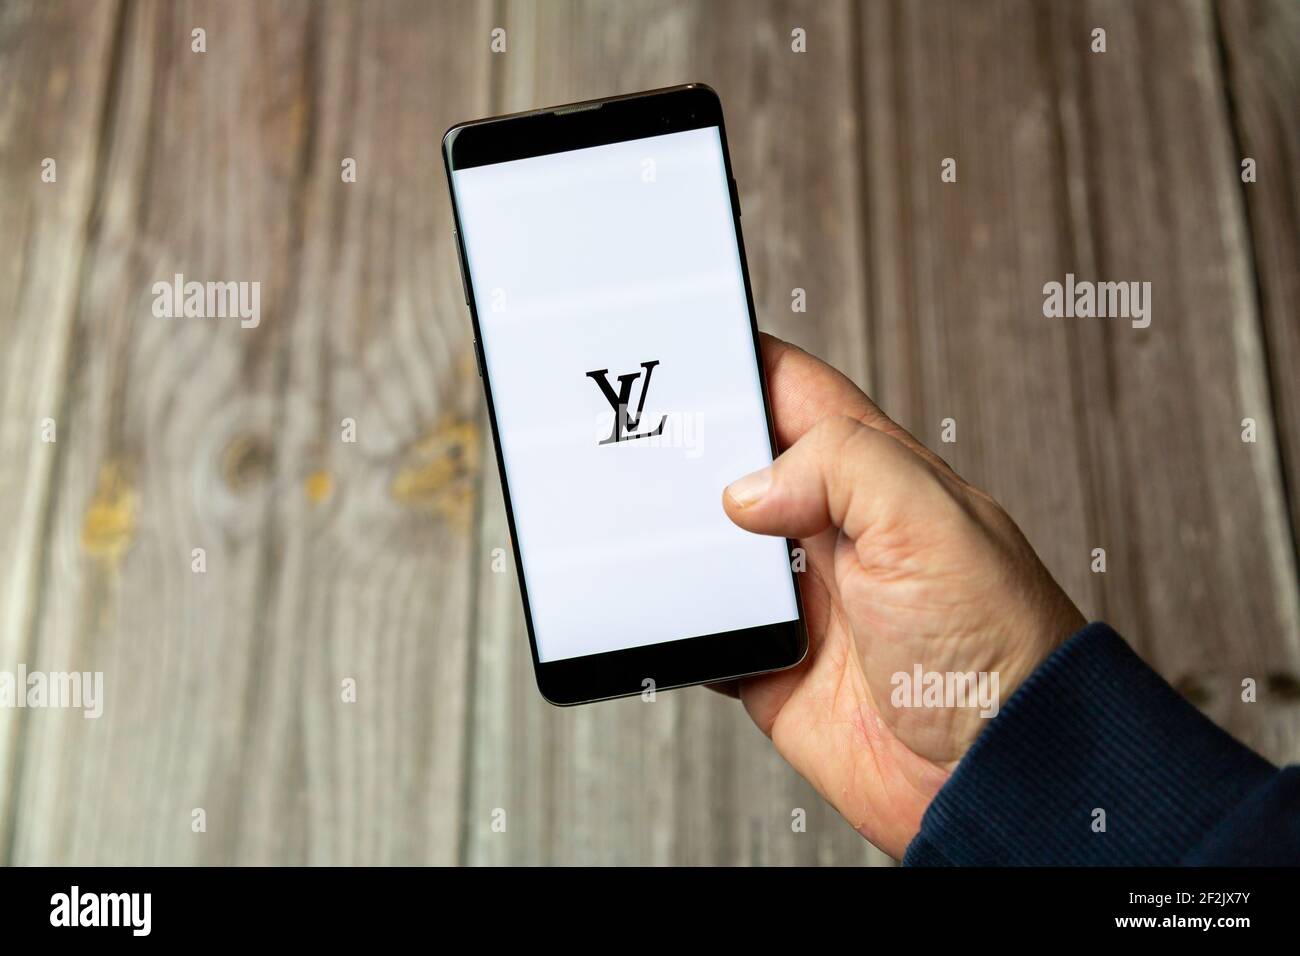 How to Create Account in Louis Vuitton App 